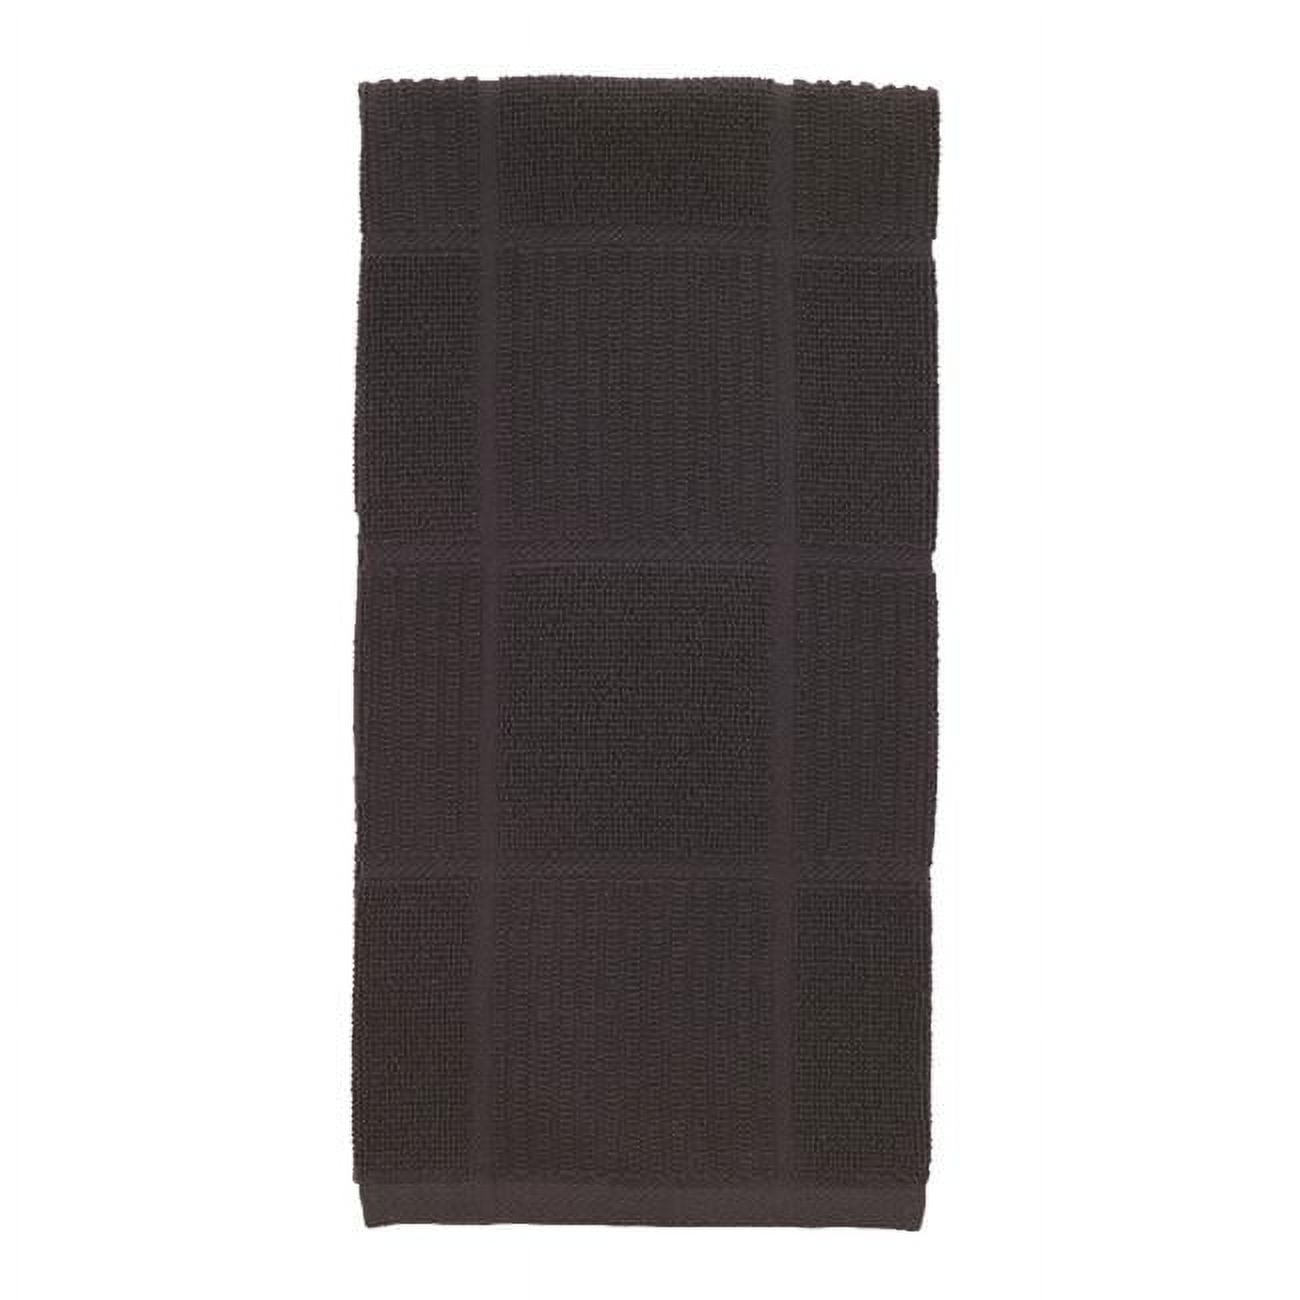 T-fal 6515902 Charcoal Cotton Kitchen Towel - Pack Of 6